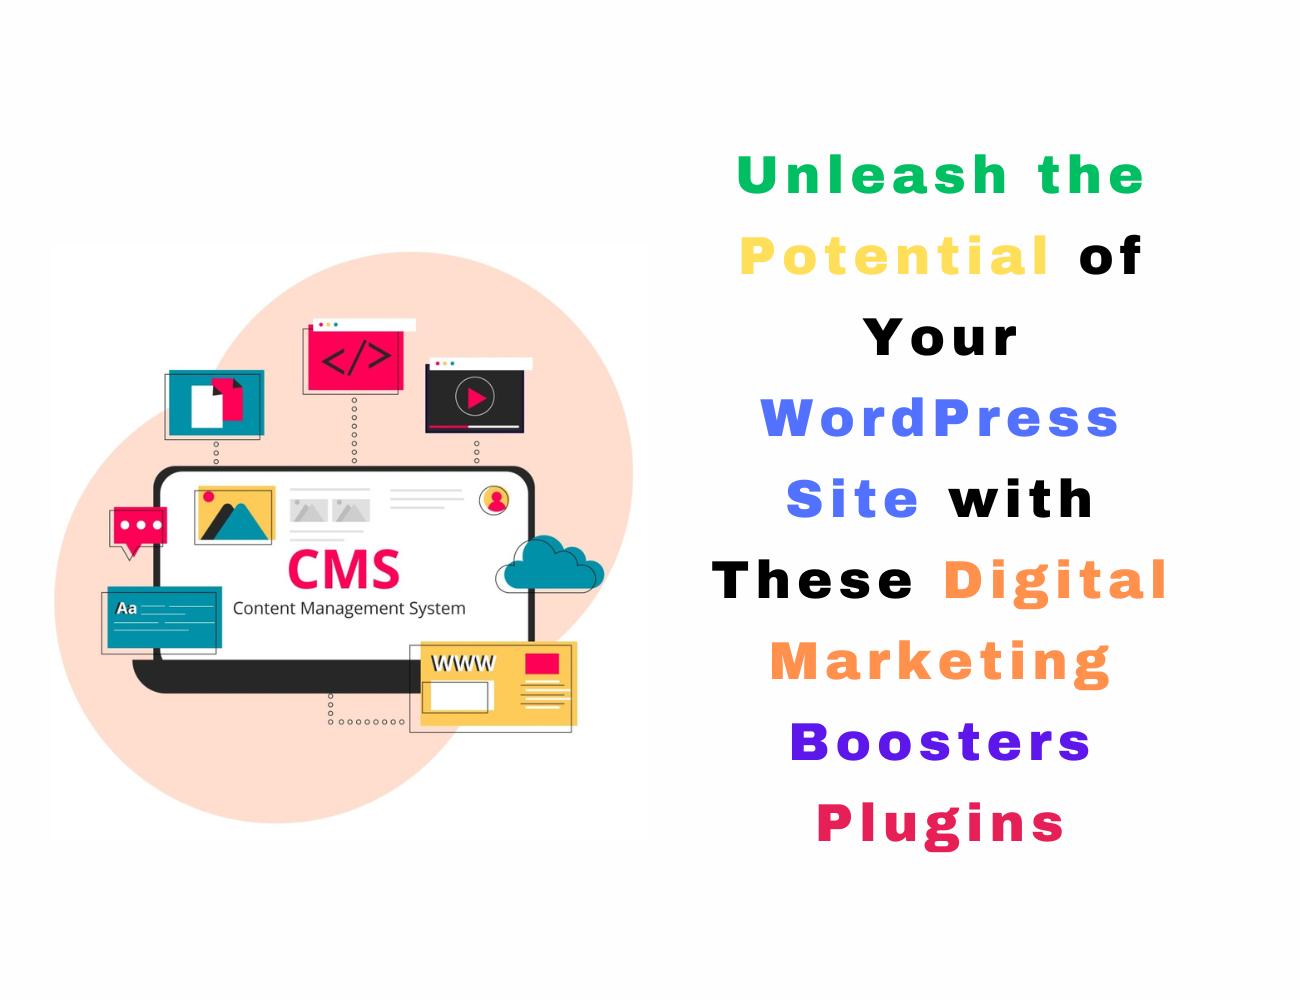 Unleash the Potential of Your WordPress Site with These Digital Marketing Boosters